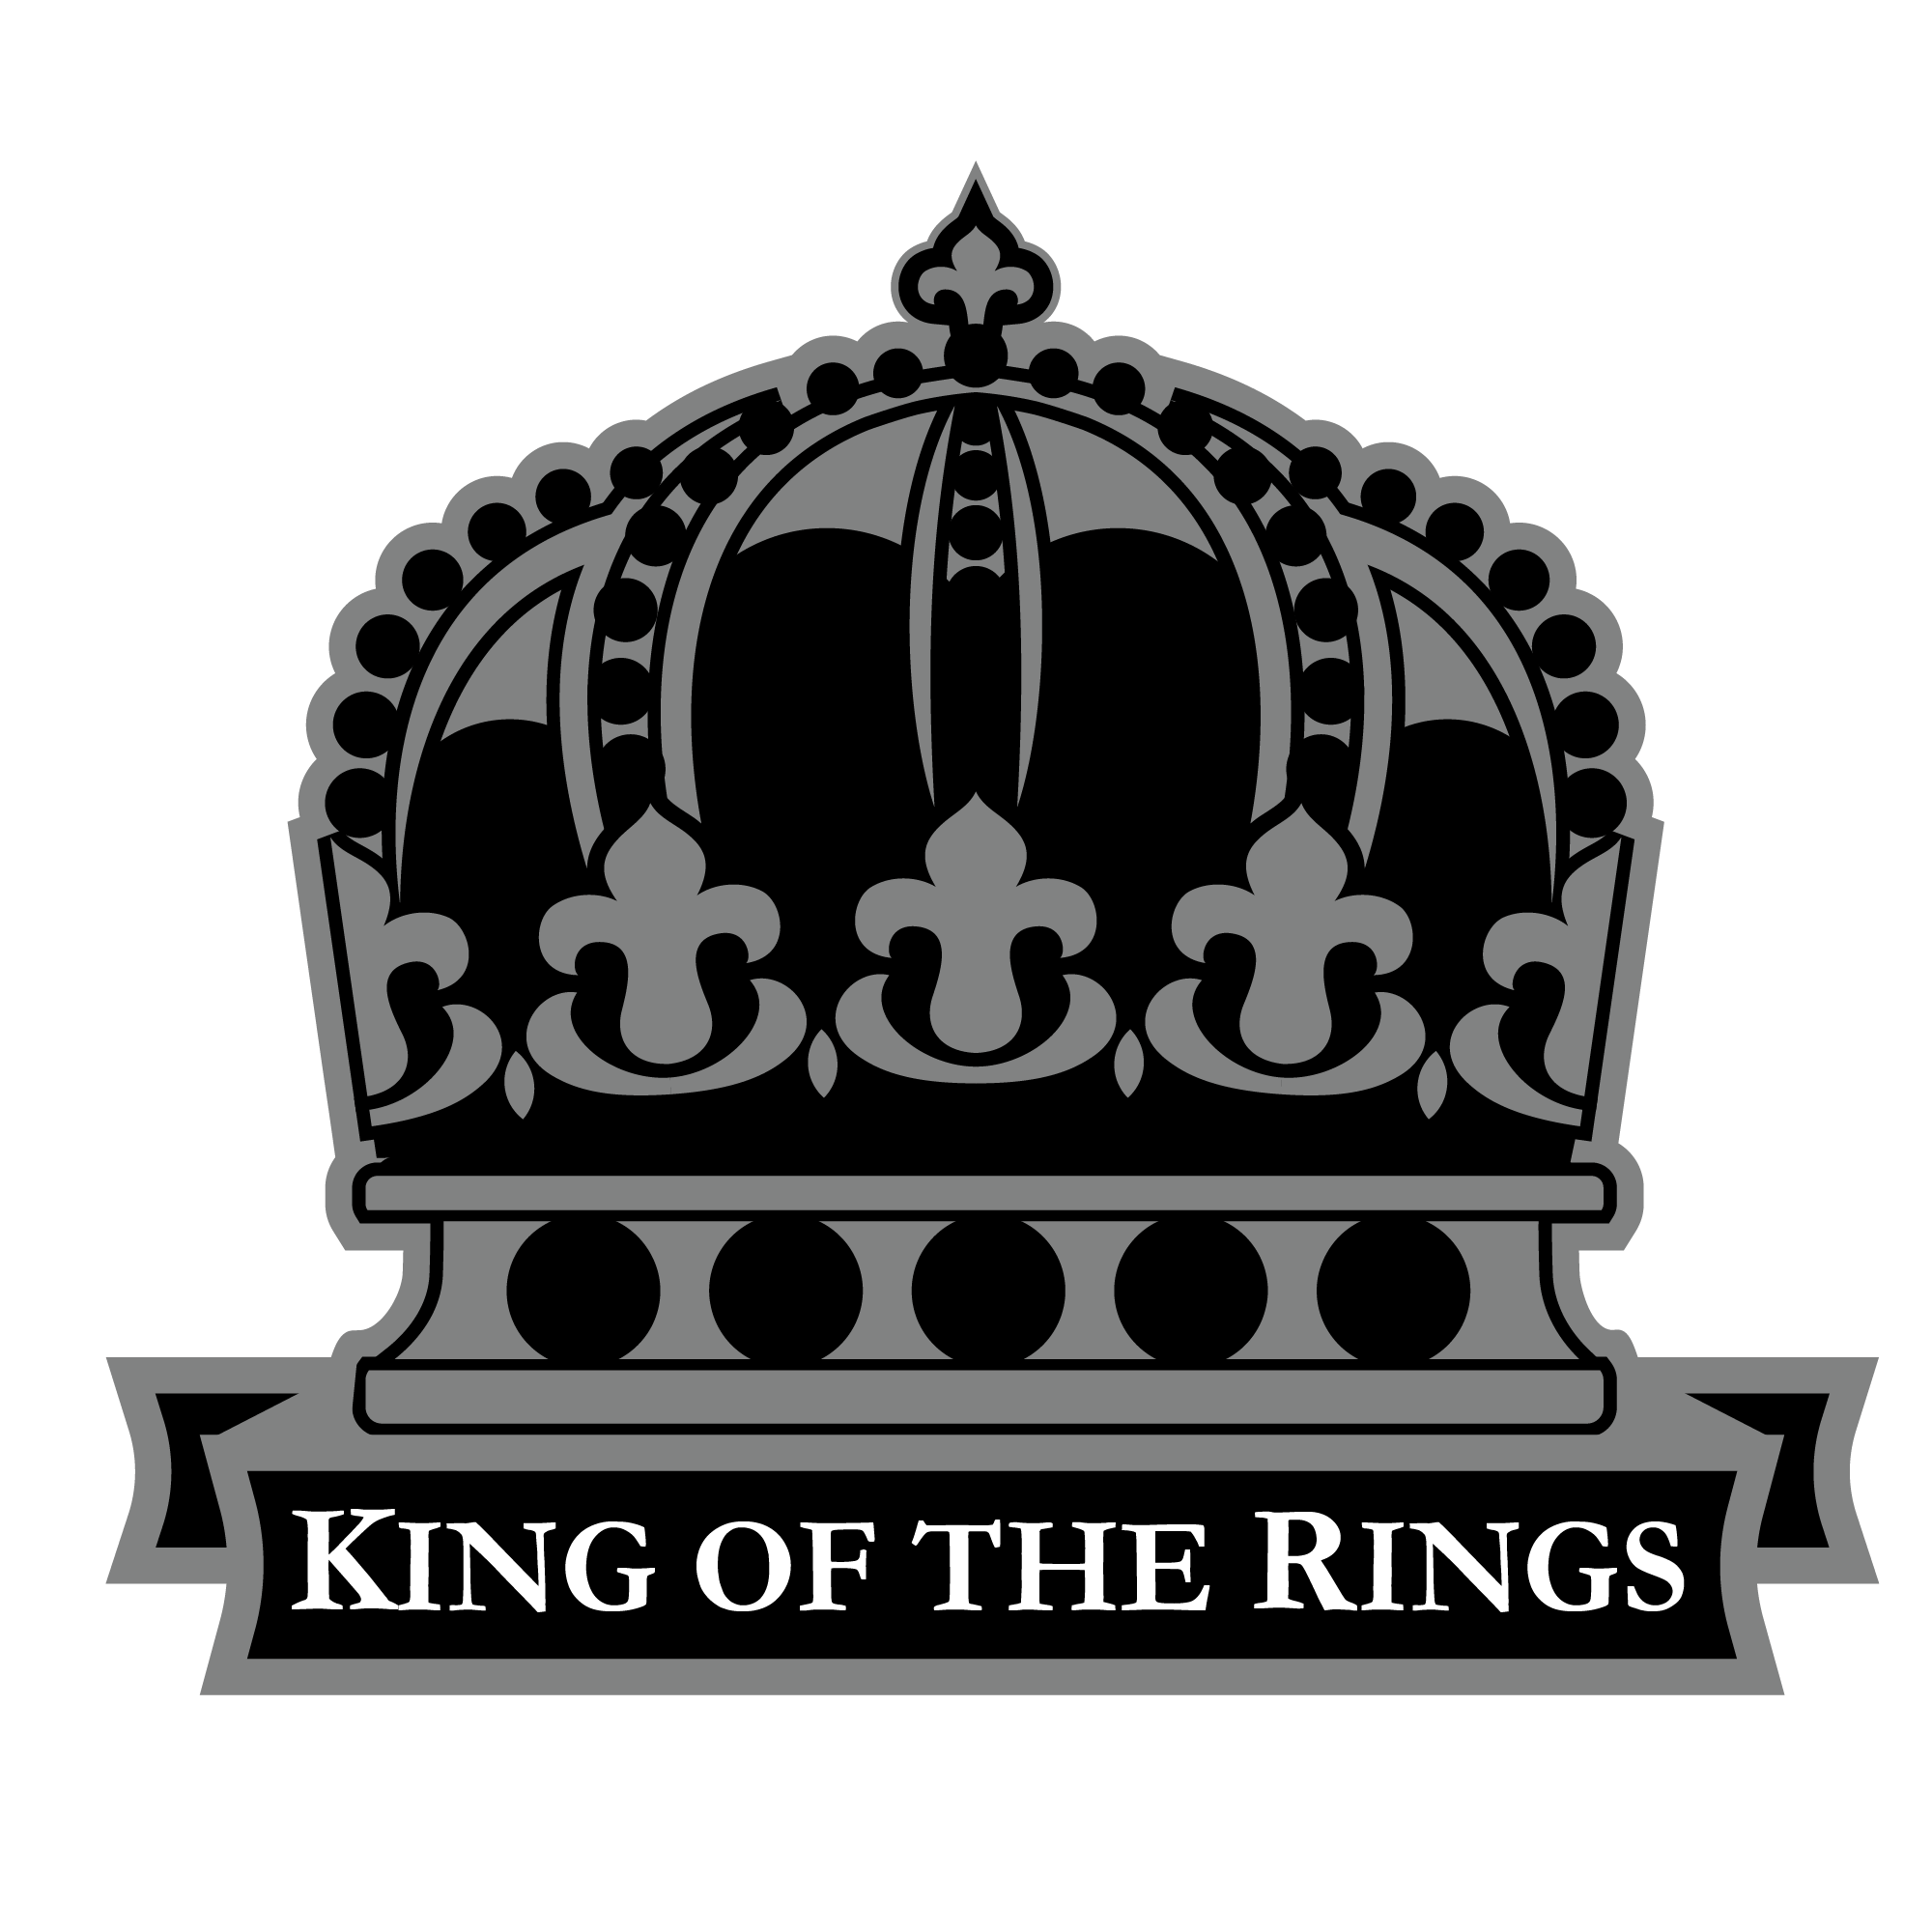 CHICAGO KING OF THE RINGS CCT Hockey Youth and Adult Hockey